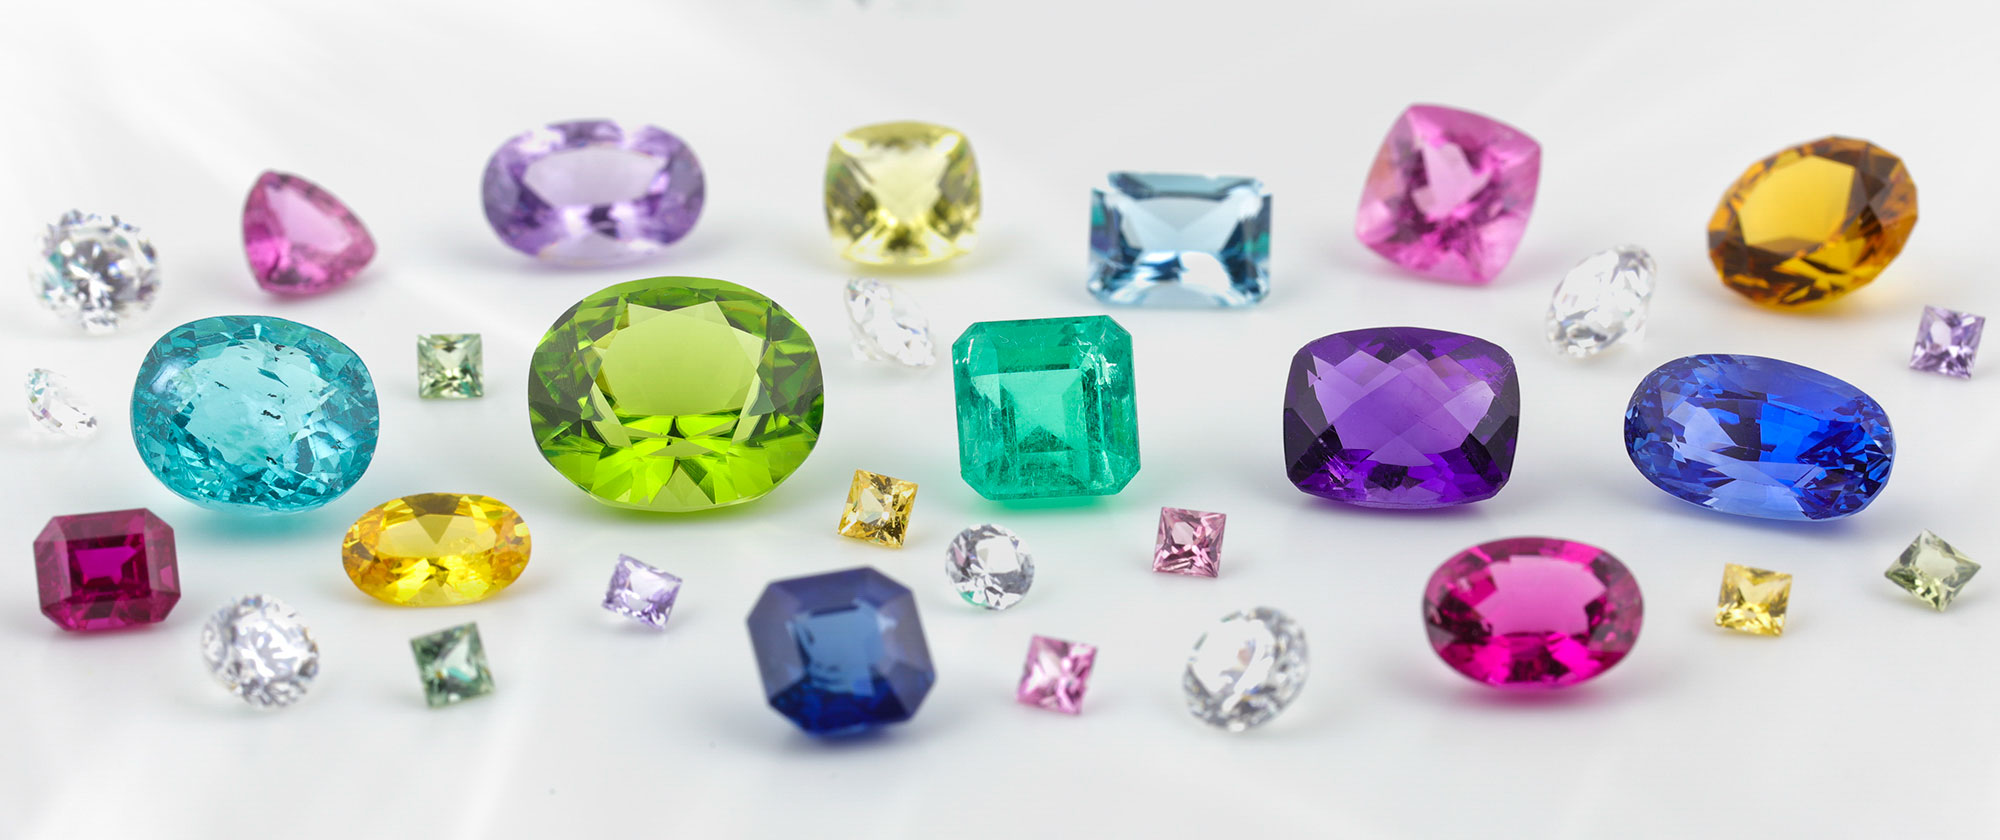 A Selection of gemstones from Studleys Jewellers in Wells Somerset UK